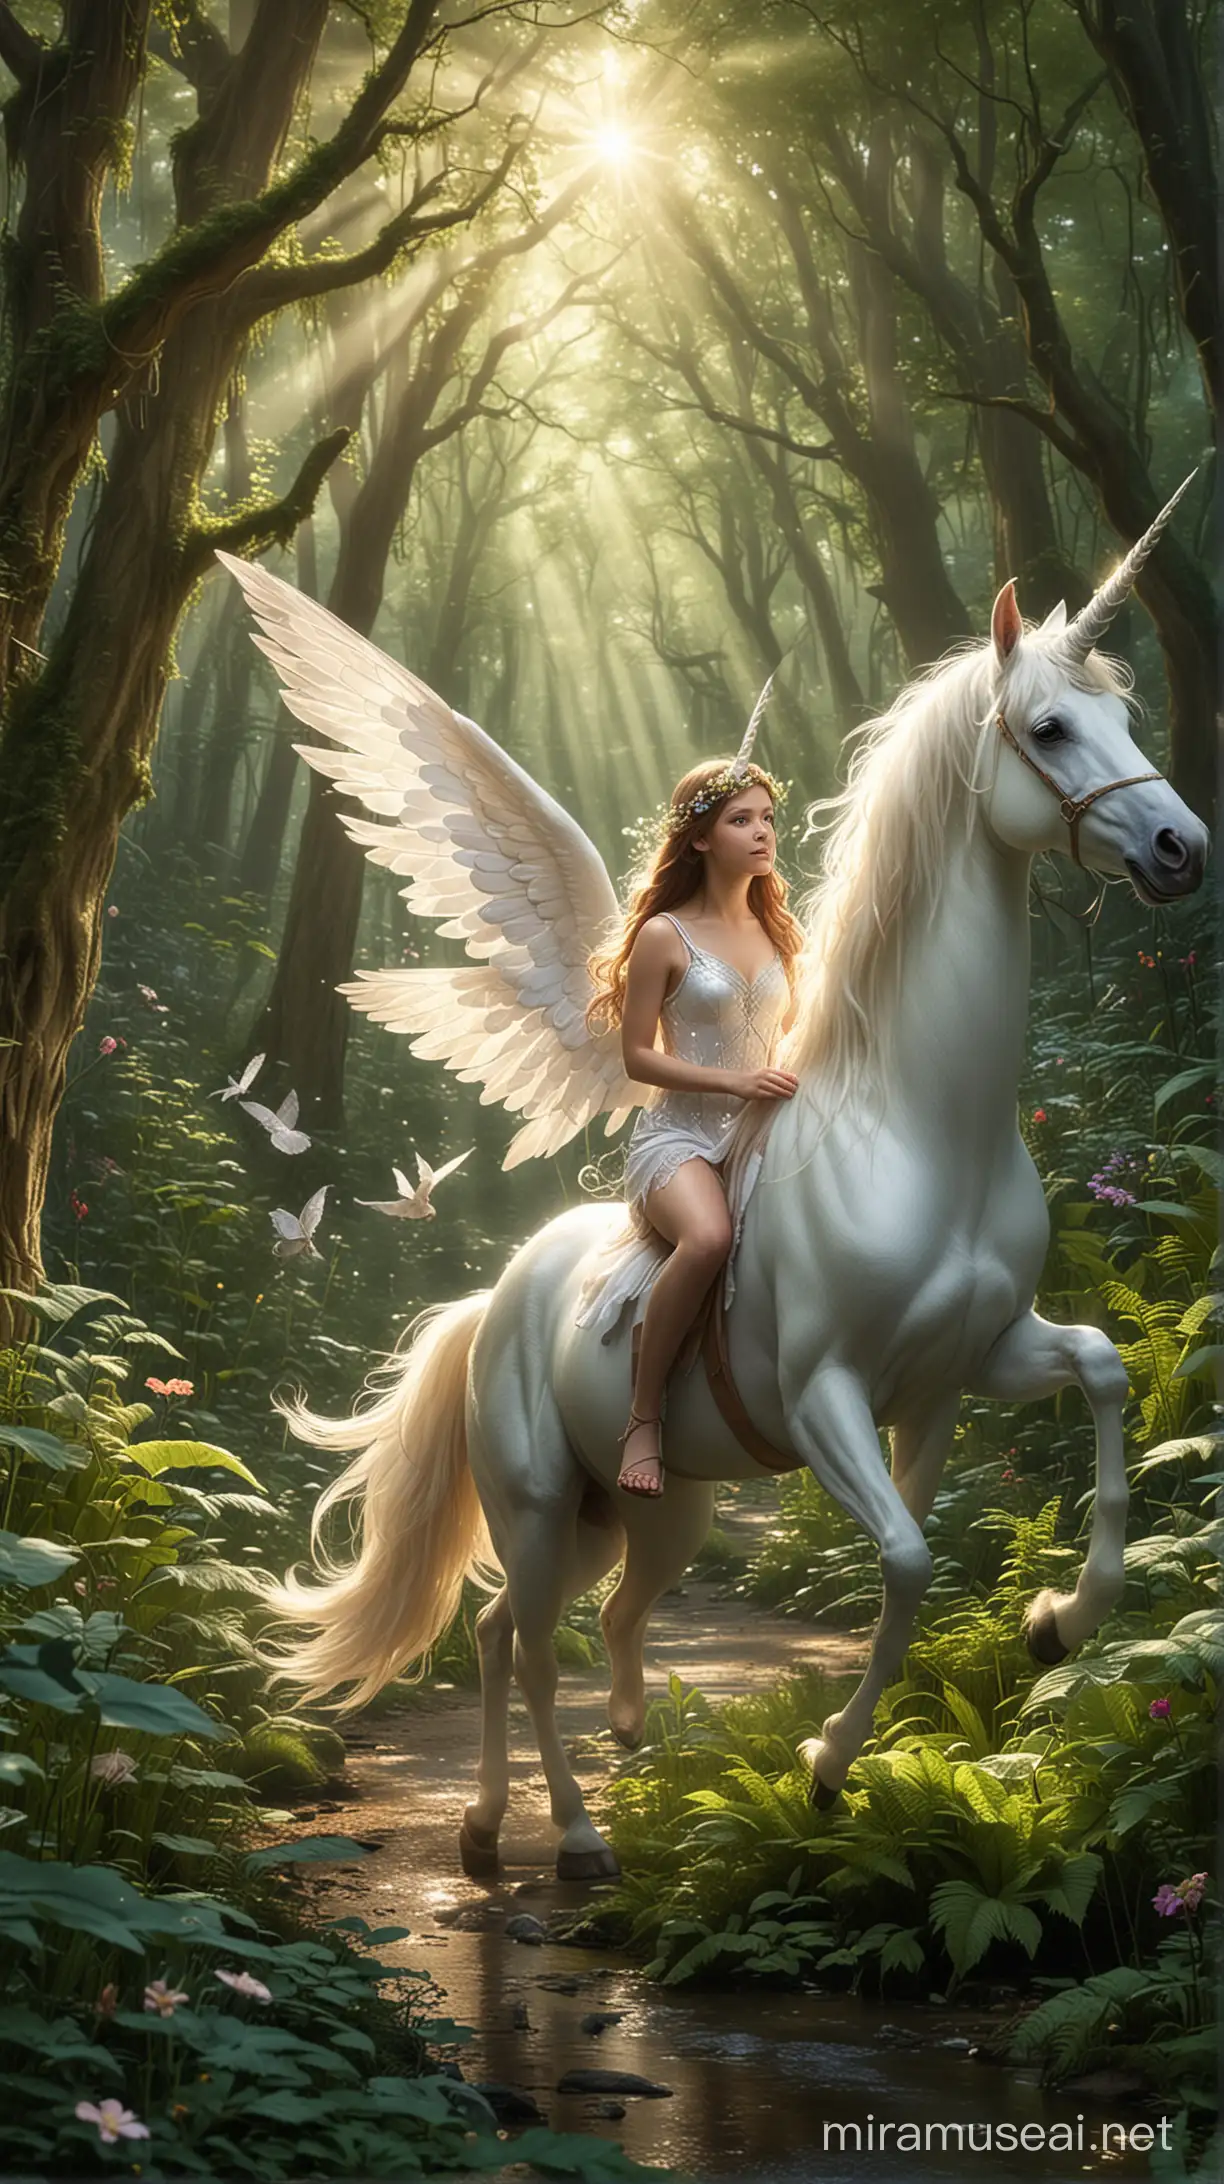 
A fairy, an angel, and a unicorn journey through a magical forest, discovering wonders and facing challenges together.
